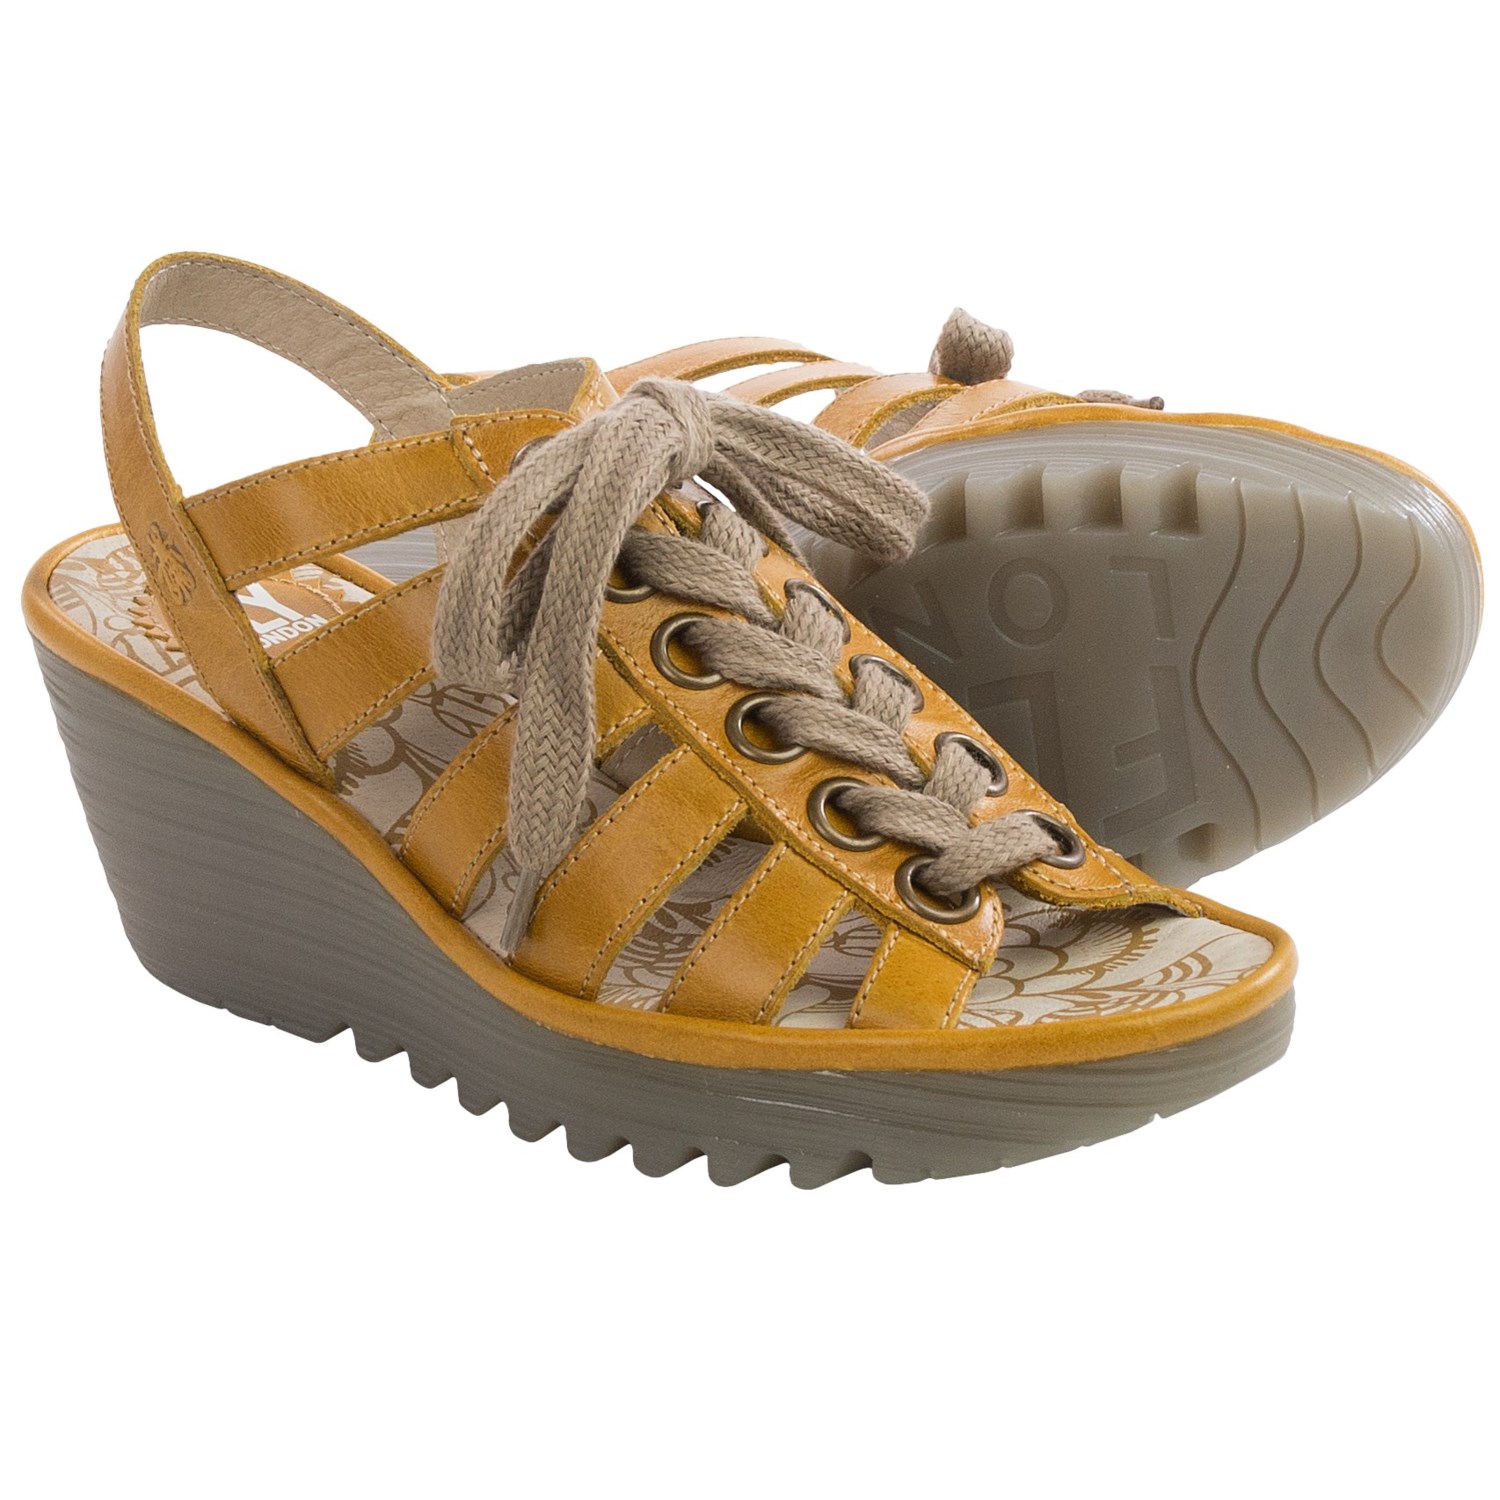 Fly London Yito Sandals (For Women) - Save 52%